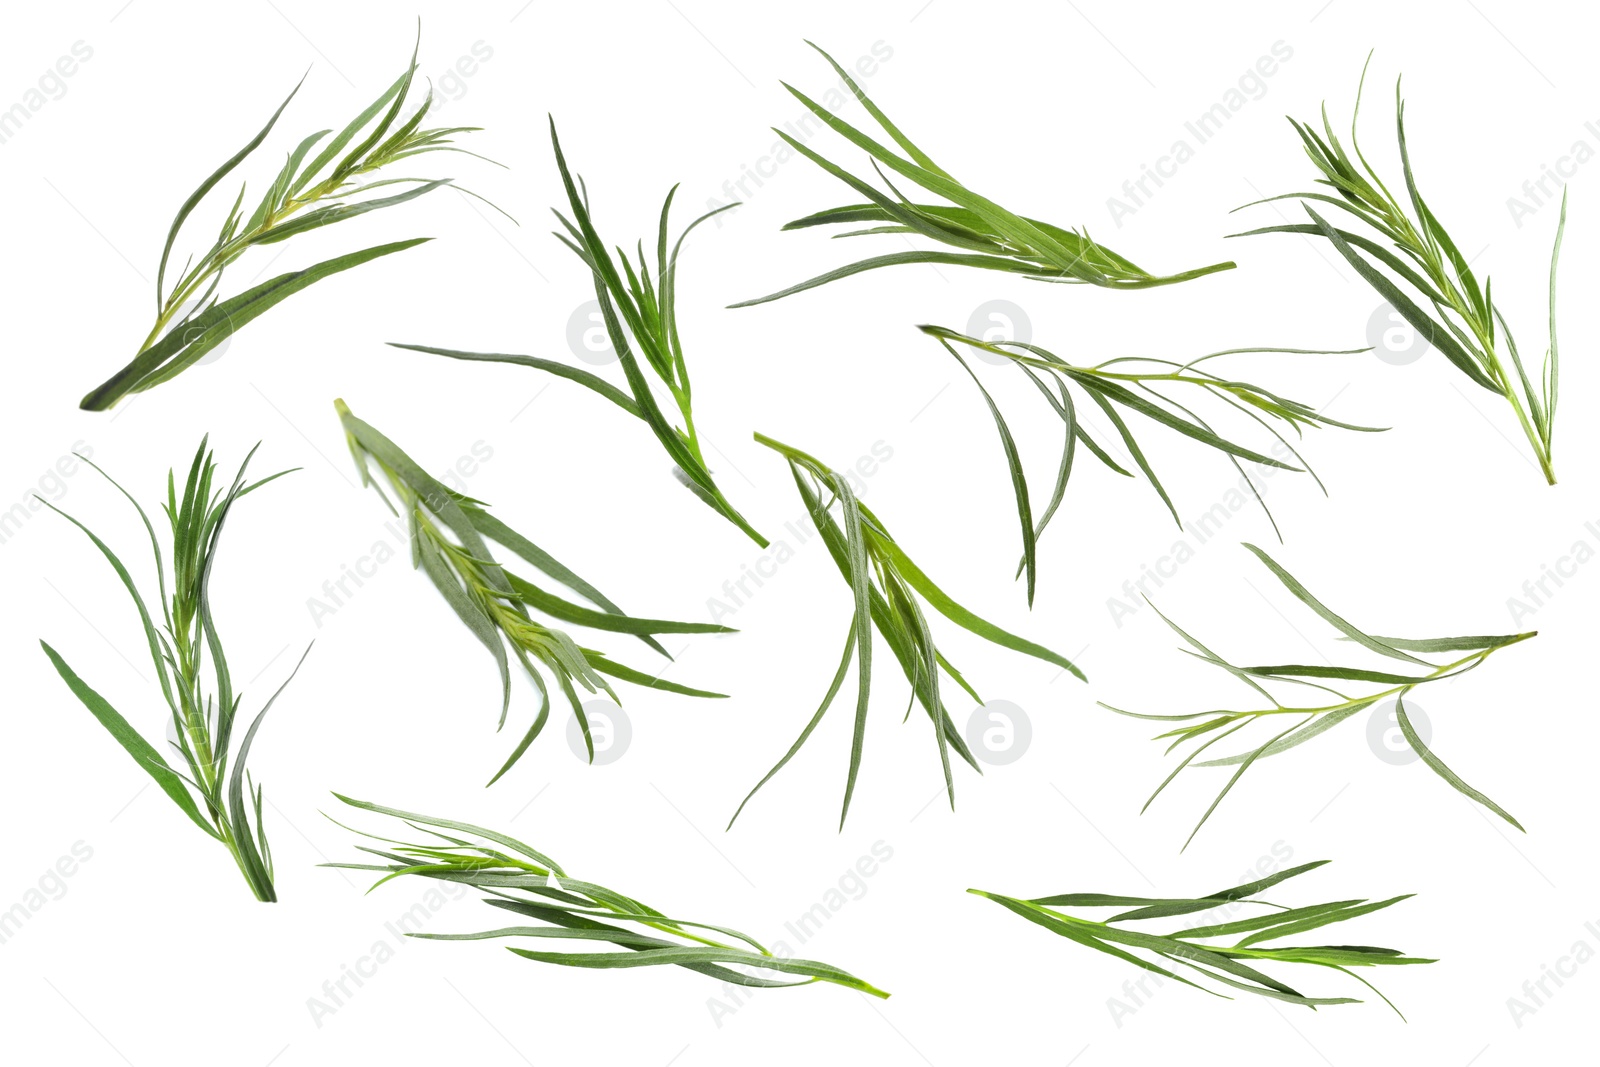 Image of Set with green tarragon isolated on white